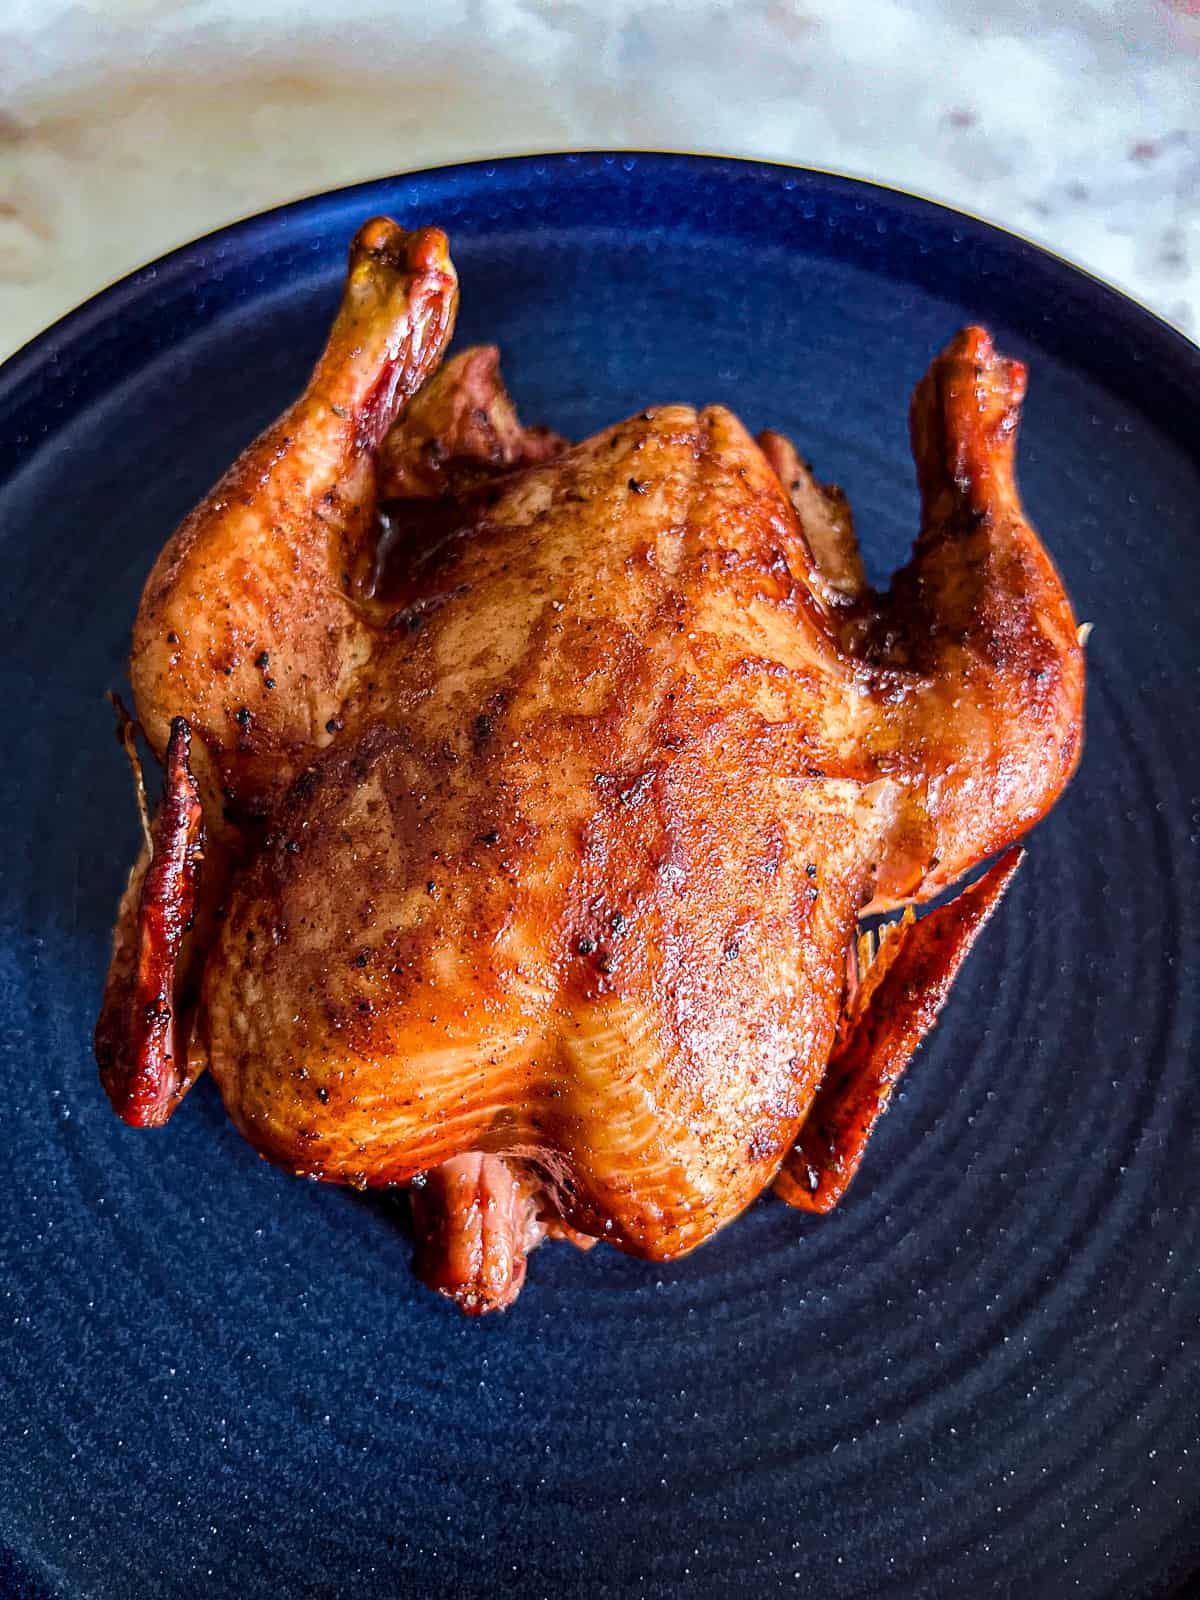 Individual Portion of Traeger Pellet Grill Smoked Cornish Hen Dinner